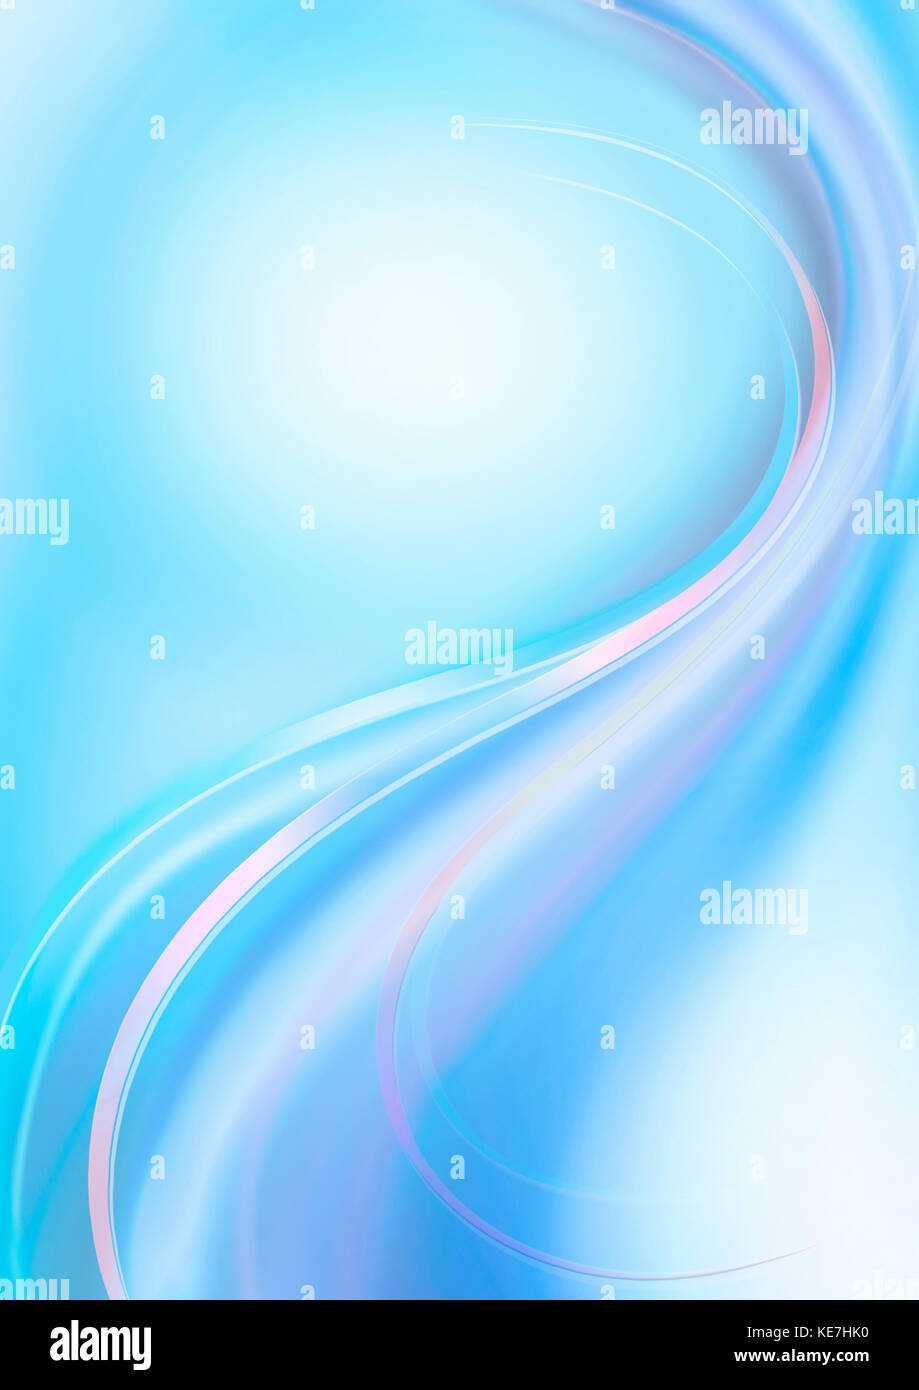 Abstract background with falling waves blue shades coated pink satin stripes Stock Photo